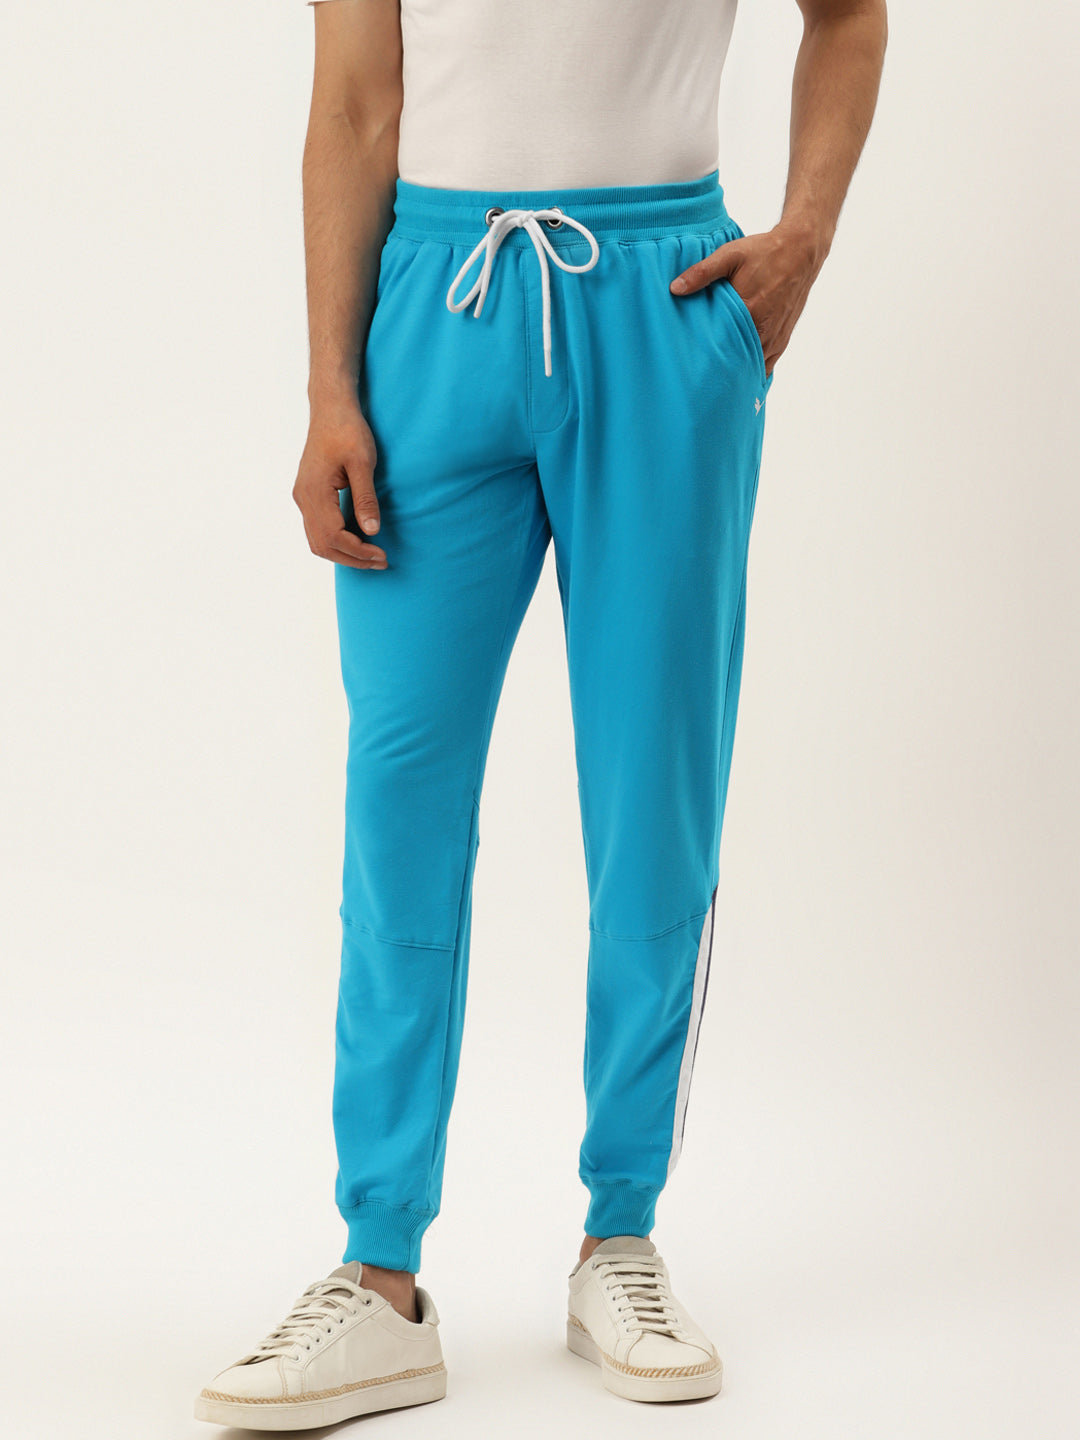 MENS COTTON RICH LYCRA WITH CONTRAST PANNEL PRINTED TRACK PANTS